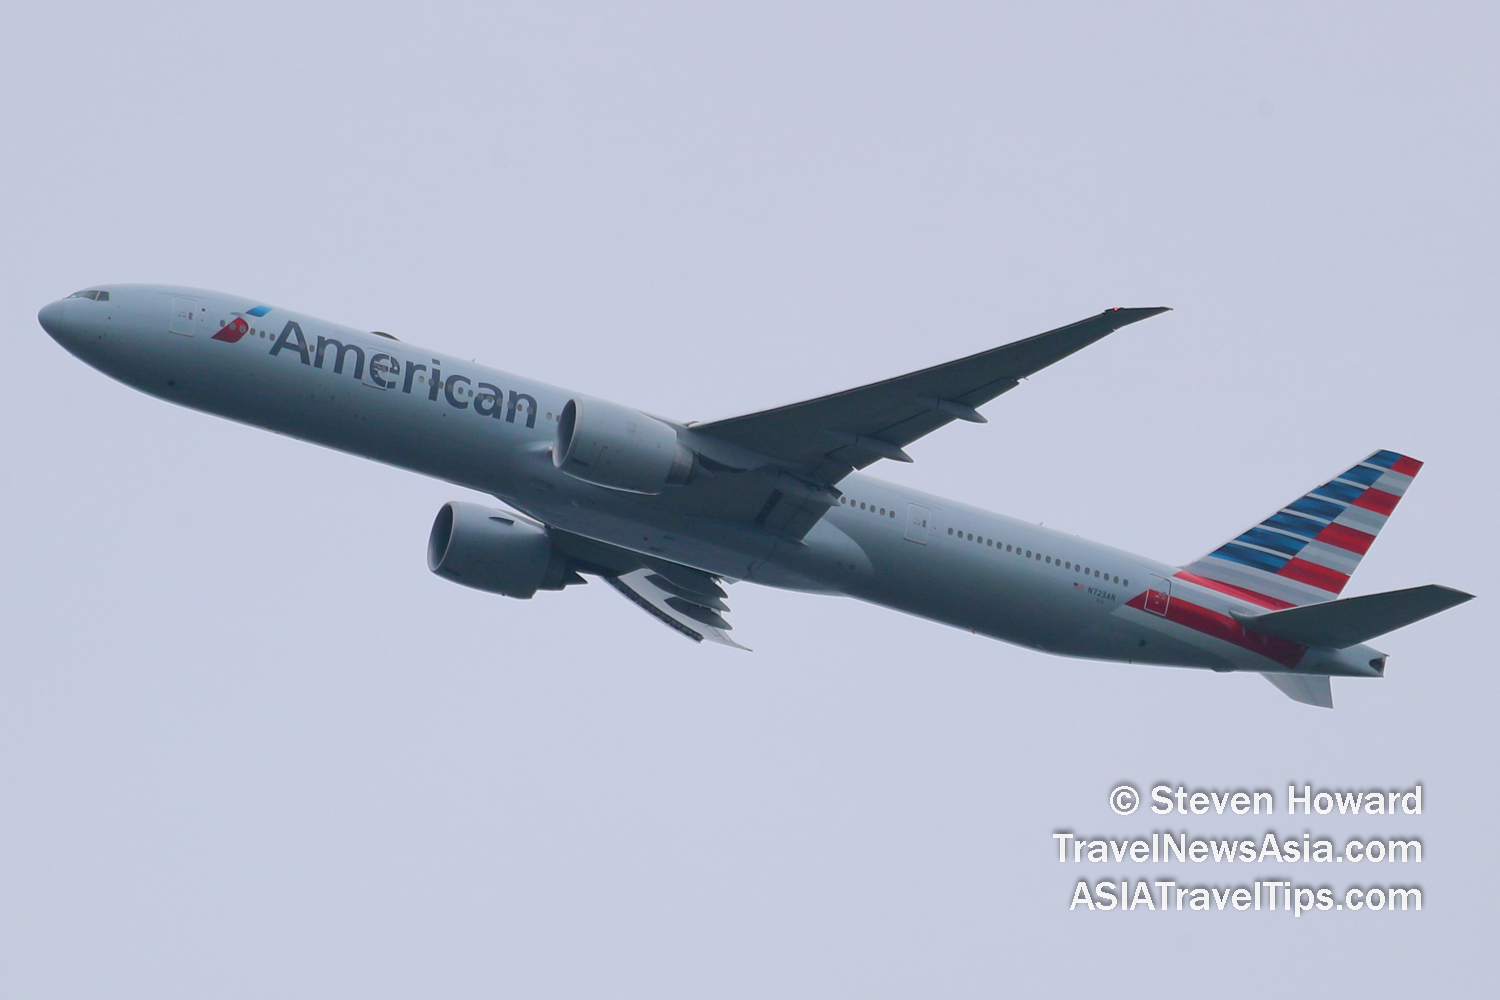 American Airlines Boeing 777 reg: N723AN. Picture by Steven Howard of TravelNewsAsia.com Click to enlarge.